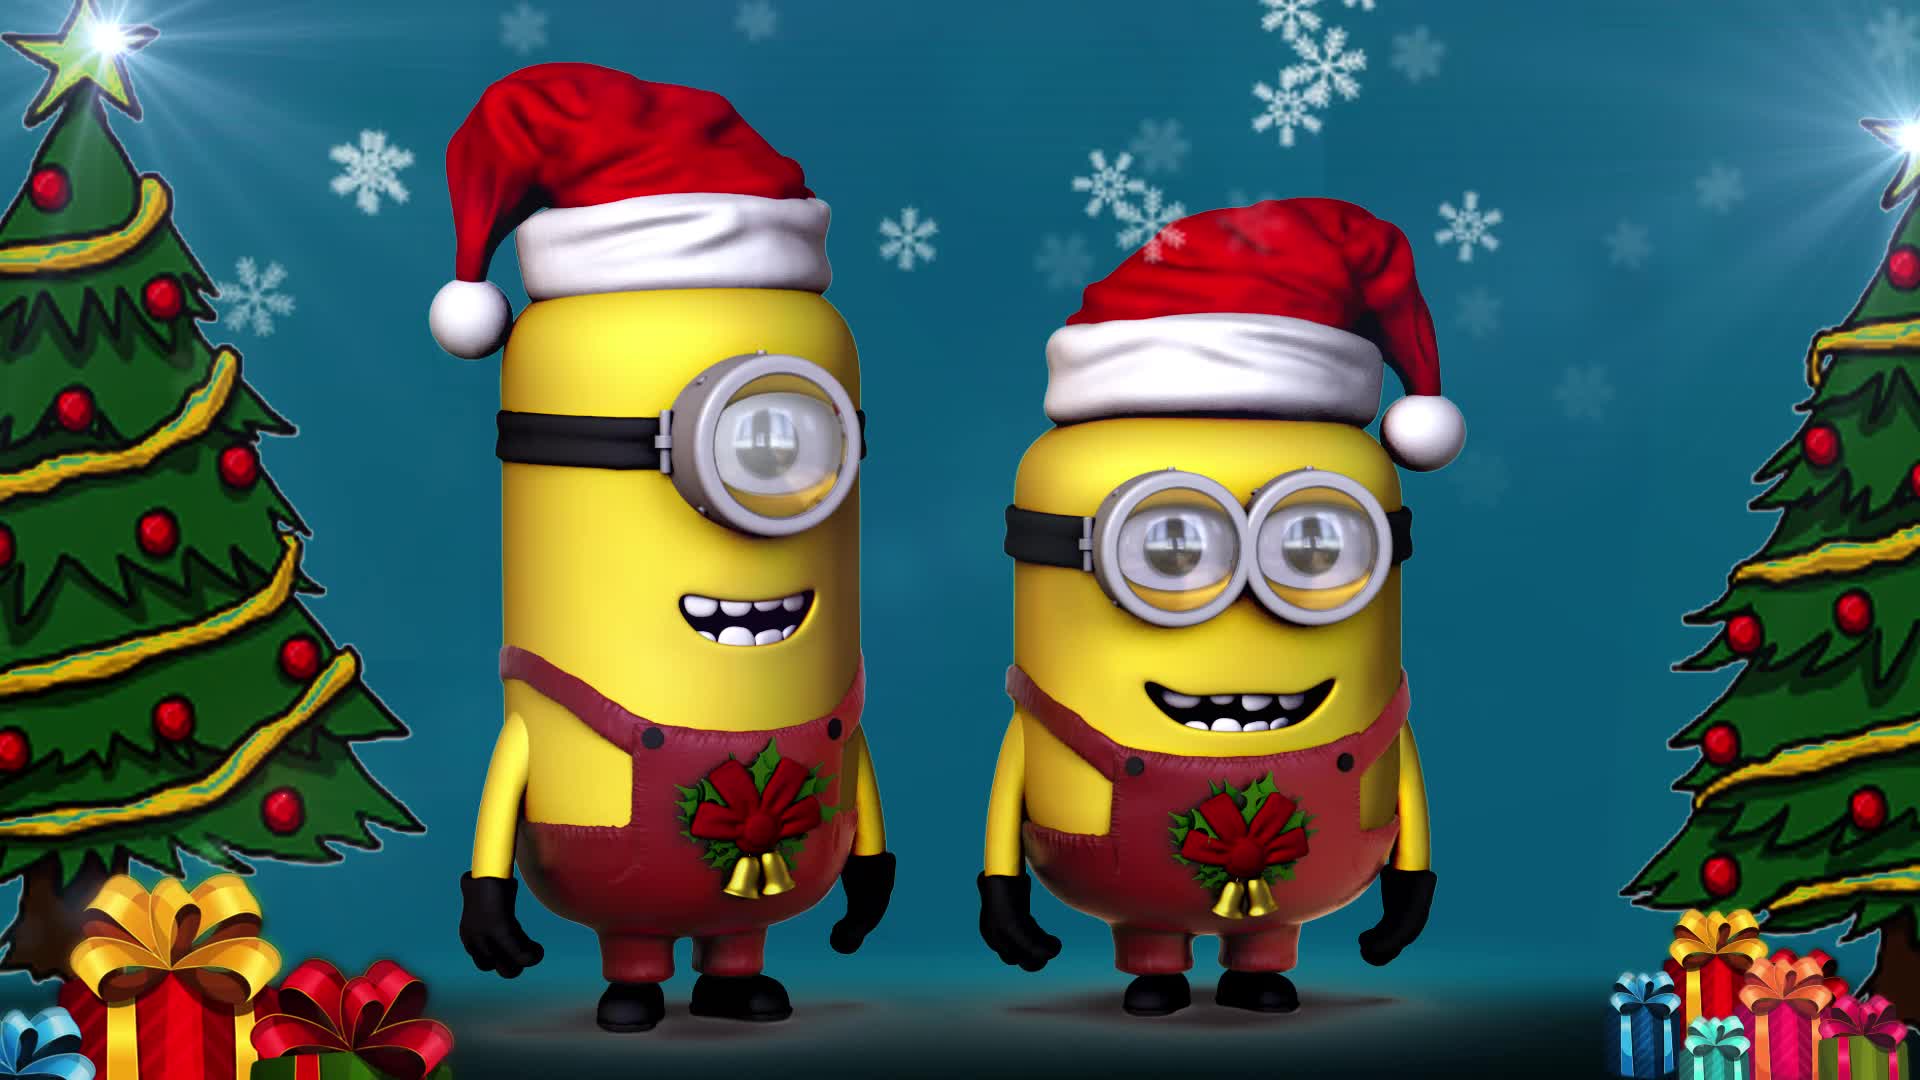 Minion Christmas wallpaper by bluecoral74  Download on ZEDGE  c580